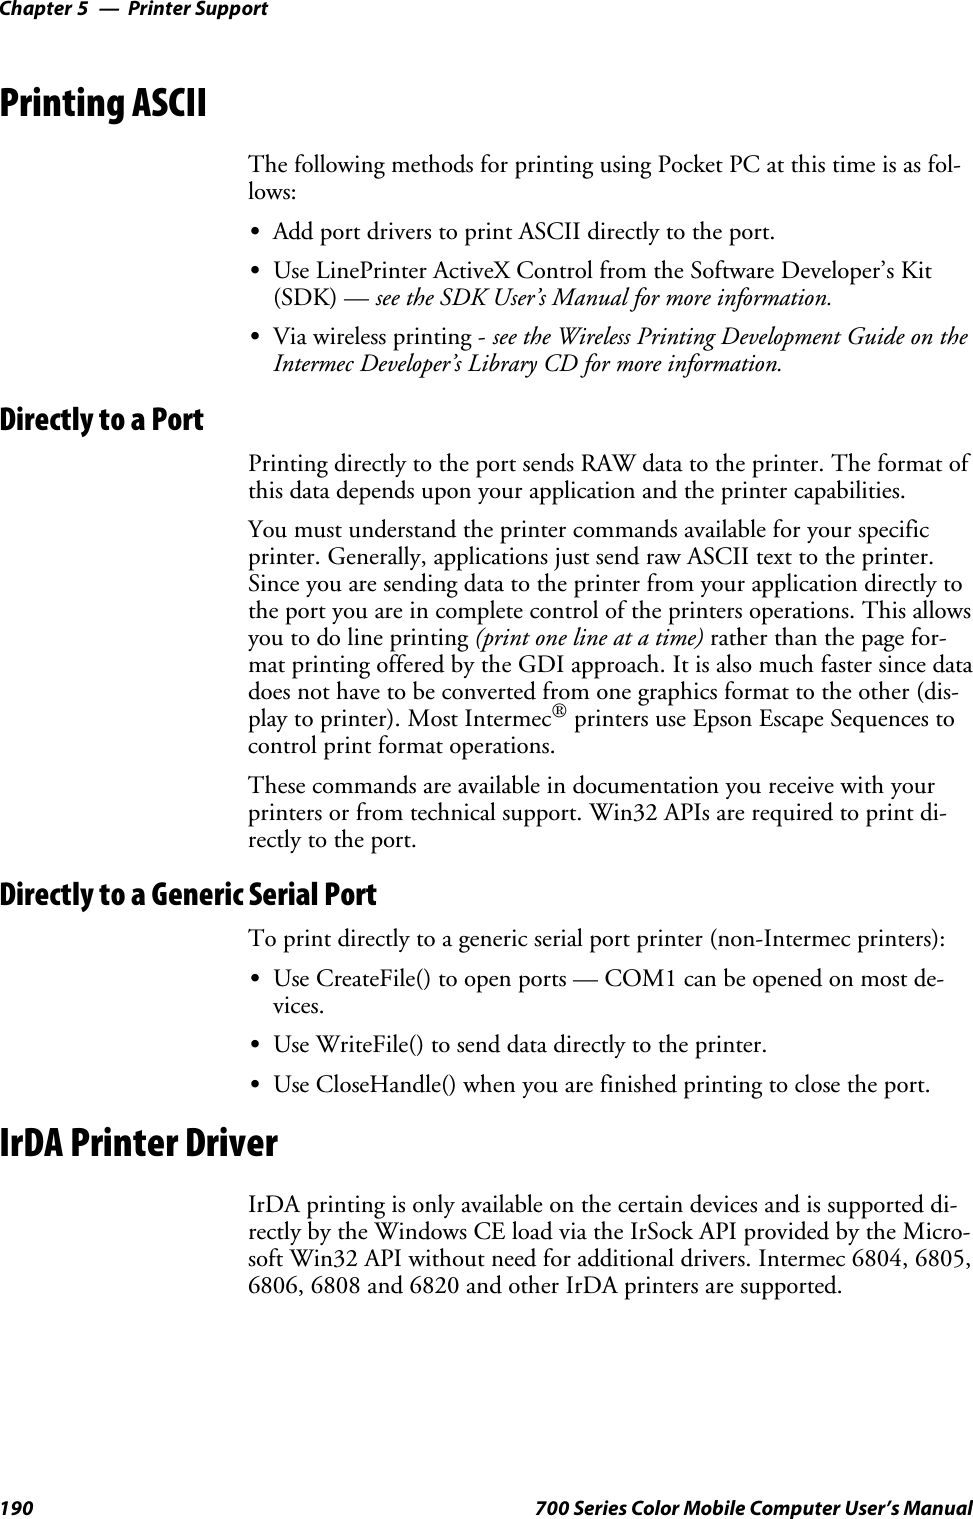 Printer SupportChapter —5190 700 Series Color Mobile Computer User’s ManualPrinting ASCIIThe following methods for printing using Pocket PC at this time is as fol-lows:SAdd port drivers to print ASCII directly to the port.SUse LinePrinter ActiveX Control from the Software Developer’s Kit(SDK) — see the SDK User’s Manual for more information.SVia wireless printing - see the Wireless Printing Development Guide on theIntermec Developer’s Library CD for more information.Directly to a PortPrinting directly to the port sends RAW data to the printer. The format ofthis data depends upon your application and the printer capabilities.Youmustunderstandtheprintercommandsavailableforyourspecificprinter. Generally, applications just send raw ASCII text to the printer.Since you are sending data to the printer from your application directly tothe port you are in complete control of the printers operations. This allowsyoutodolineprinting(printonelineatatime)rather than the page for-mat printing offered by the GDI approach. It is also much faster since datadoes not have to be converted from one graphics format to the other (dis-play to printer). Most Intermec®printers use Epson Escape Sequences tocontrol print format operations.These commands are available in documentation you receive with yourprinters or from technical support. Win32 APIs are required to print di-rectly to the port.Directly to a Generic Serial PortTo print directly to a generic serial port printer (non-Intermec printers):SUse CreateFile() to open ports — COM1 can be opened on most de-vices.SUse WriteFile() to send data directly to the printer.SUse CloseHandle() when you are finished printing to close the port.IrDA Printer DriverIrDA printing is only available on the certain devices and is supported di-rectly by the Windows CE load via the IrSock API provided by the Micro-soft Win32 API without need for additional drivers. Intermec 6804, 6805,6806, 6808 and 6820 and other IrDA printers are supported.